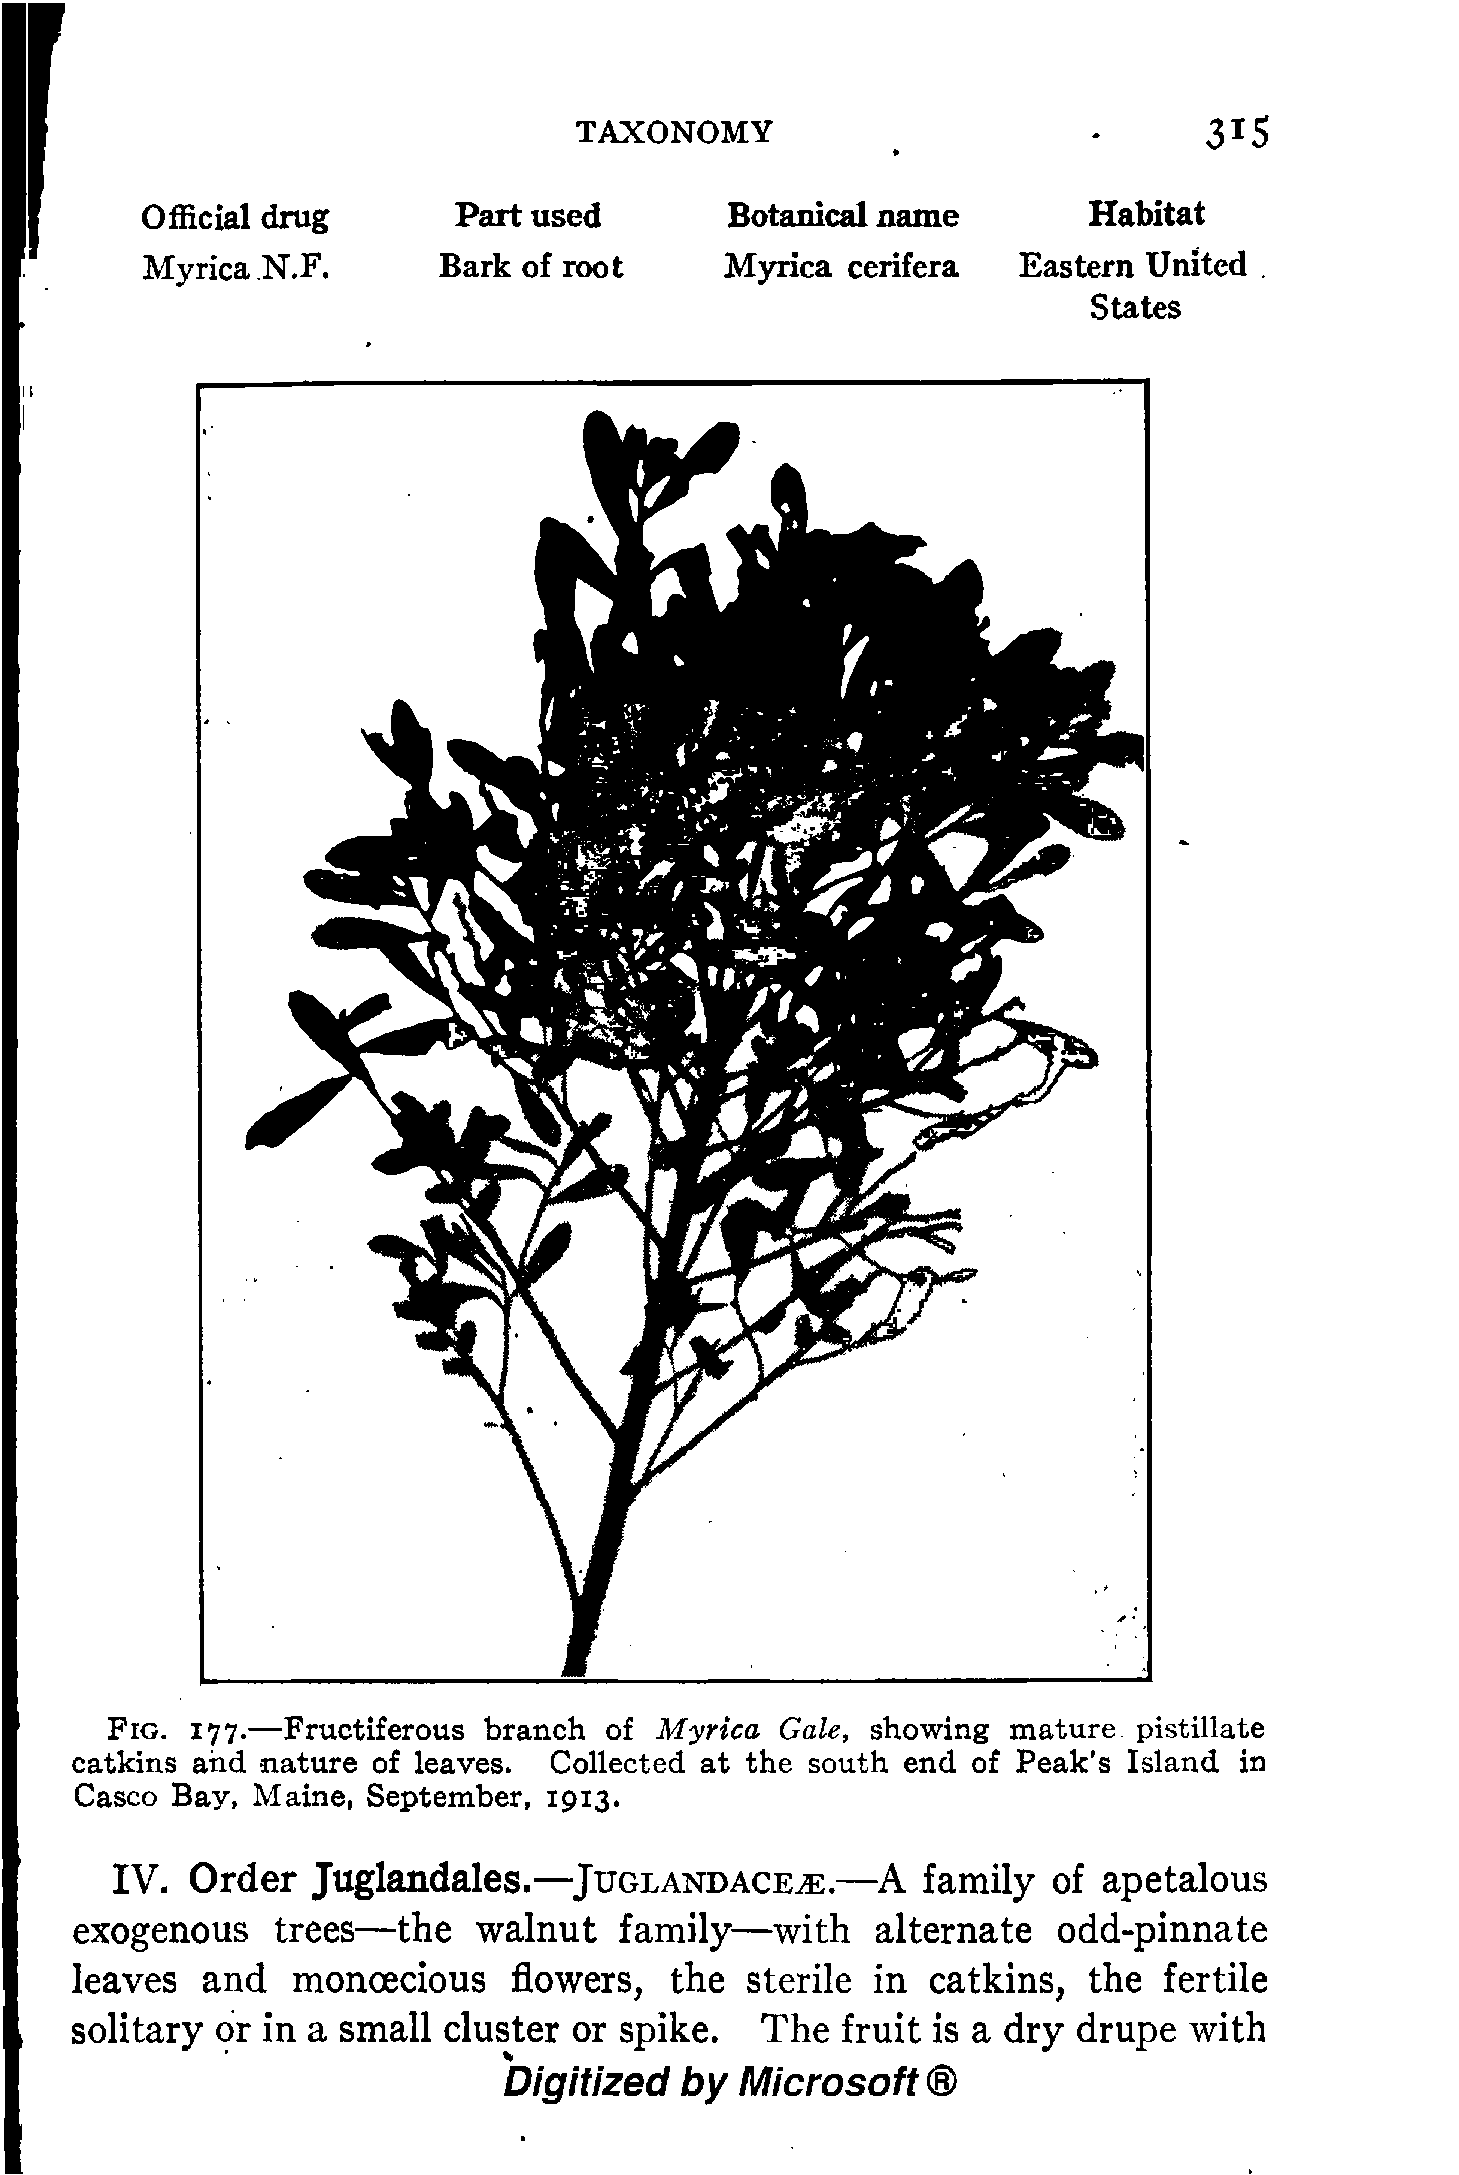 Fig. 177.—Fructiferous branch of Myrica Gale, showing mature pistillate catkins and nature of leaves. Collected at the south end of Peak s Island in Casco Bay, Maine, September, 1913.